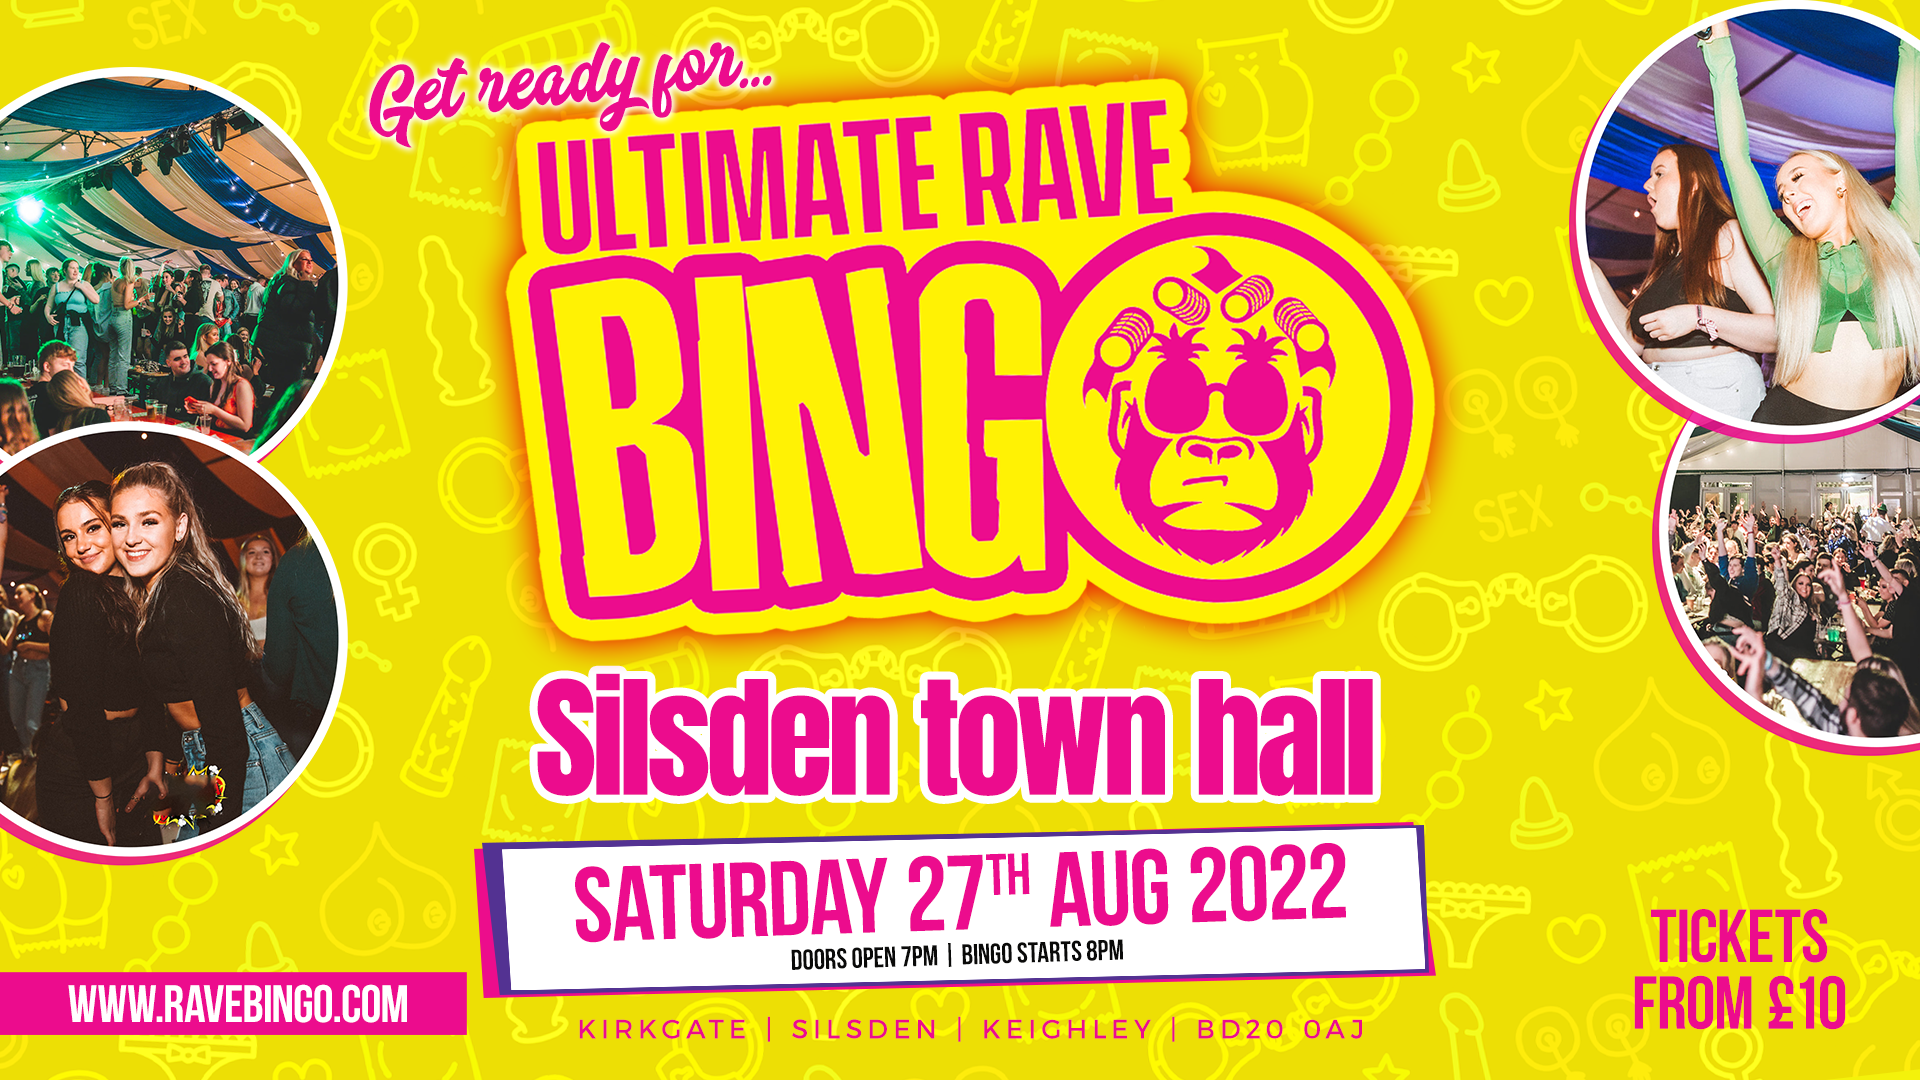 Ultimate Rave Bingo, What's On in Silsden, Saturday 27th August 2022, Dance, Play Bingo and Have a Great Night!